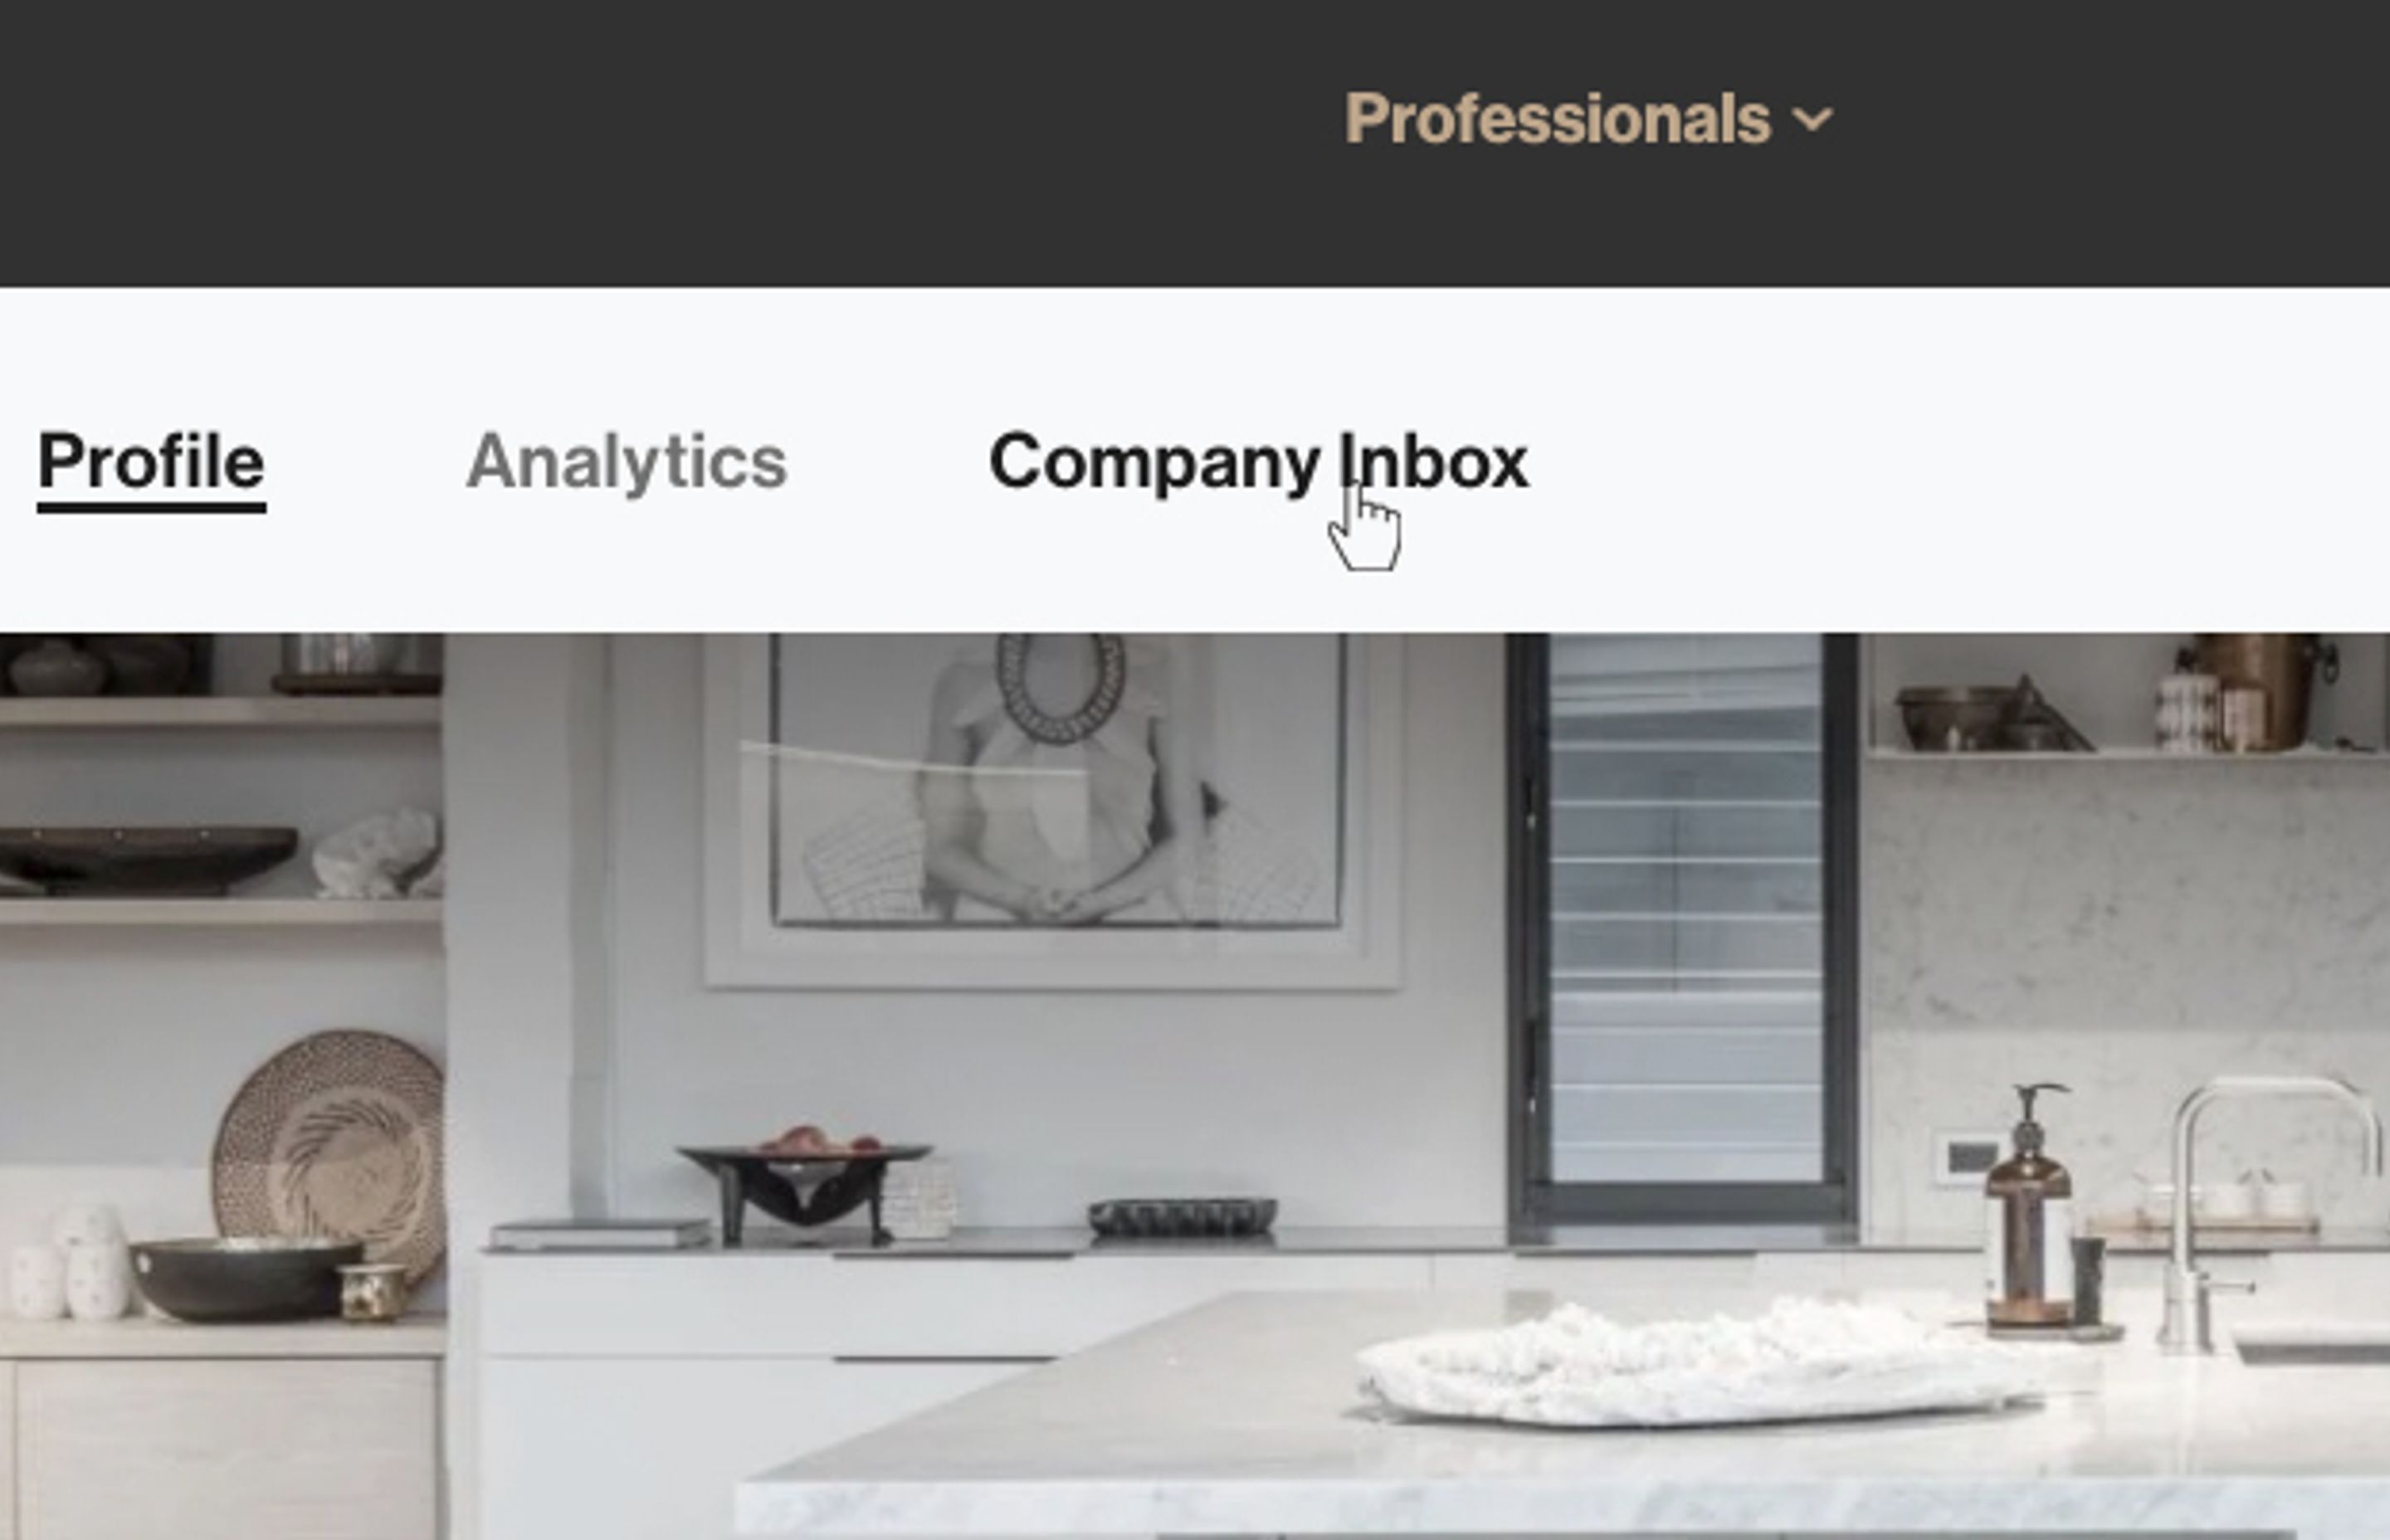 New Feature - Company Inbox